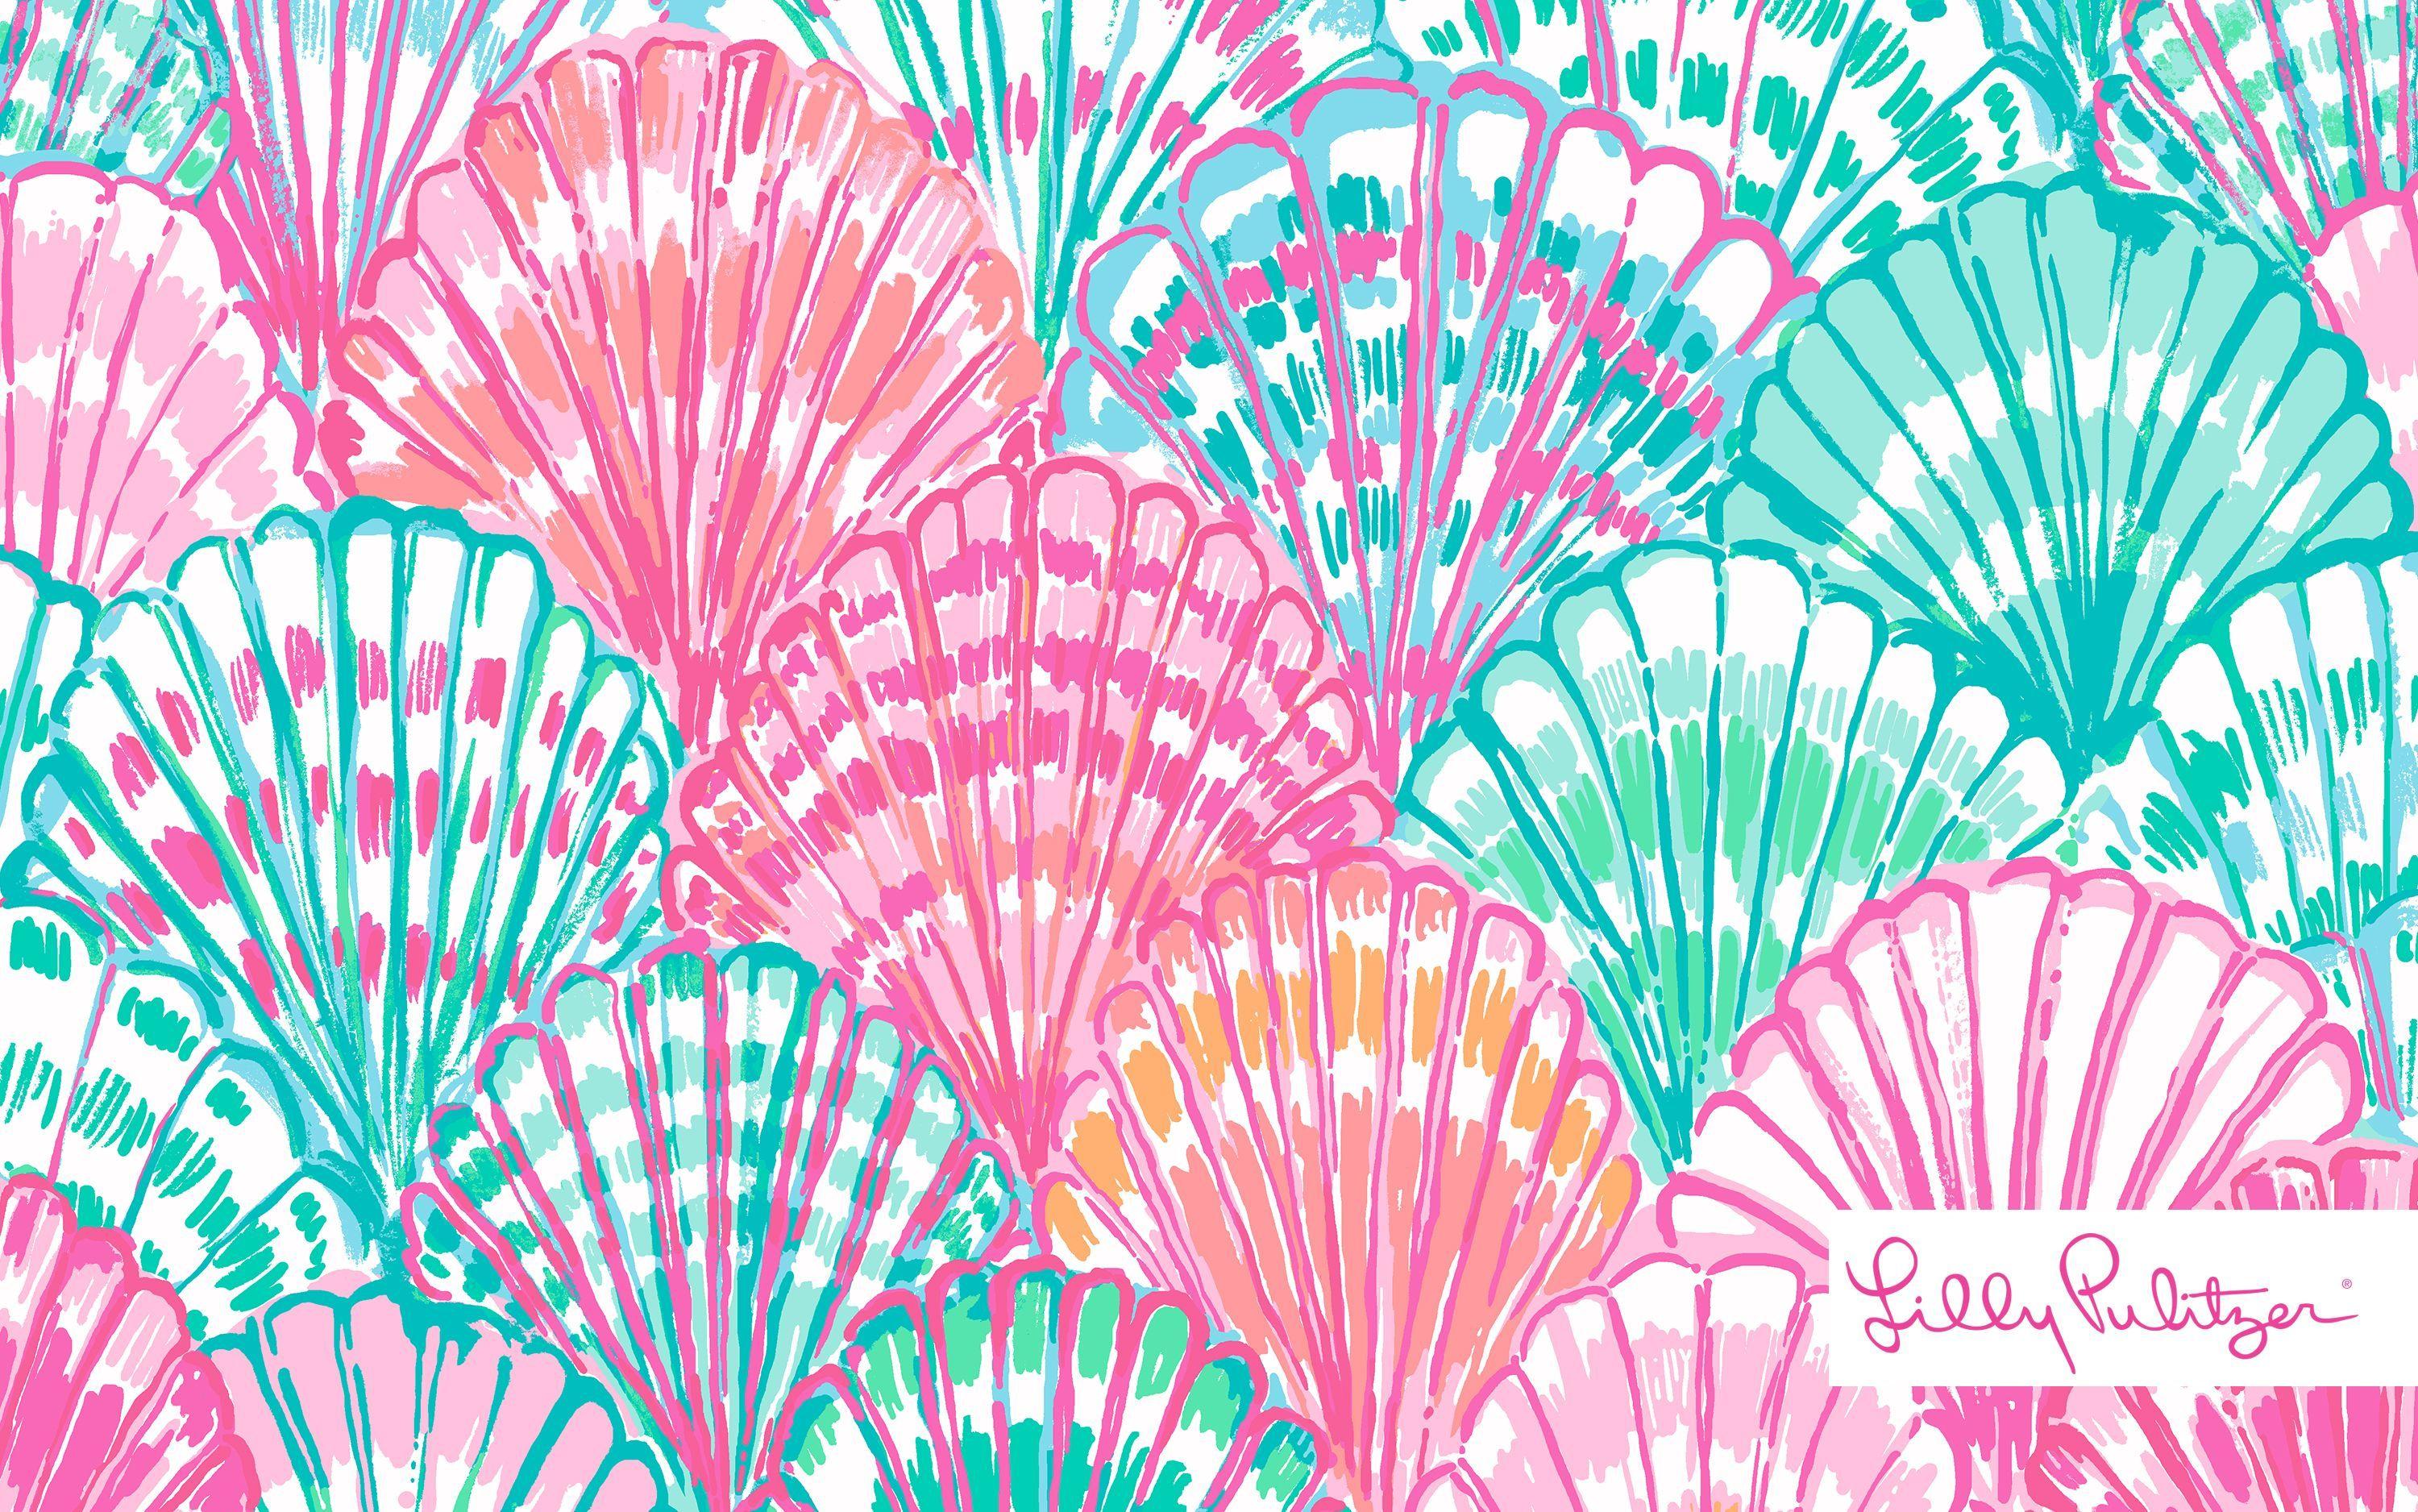 New Prints  Latest Prints  Lilly Pulitzer  Lily pulitzer wallpaper Lily  wallpaper Phone wallpaper patterns